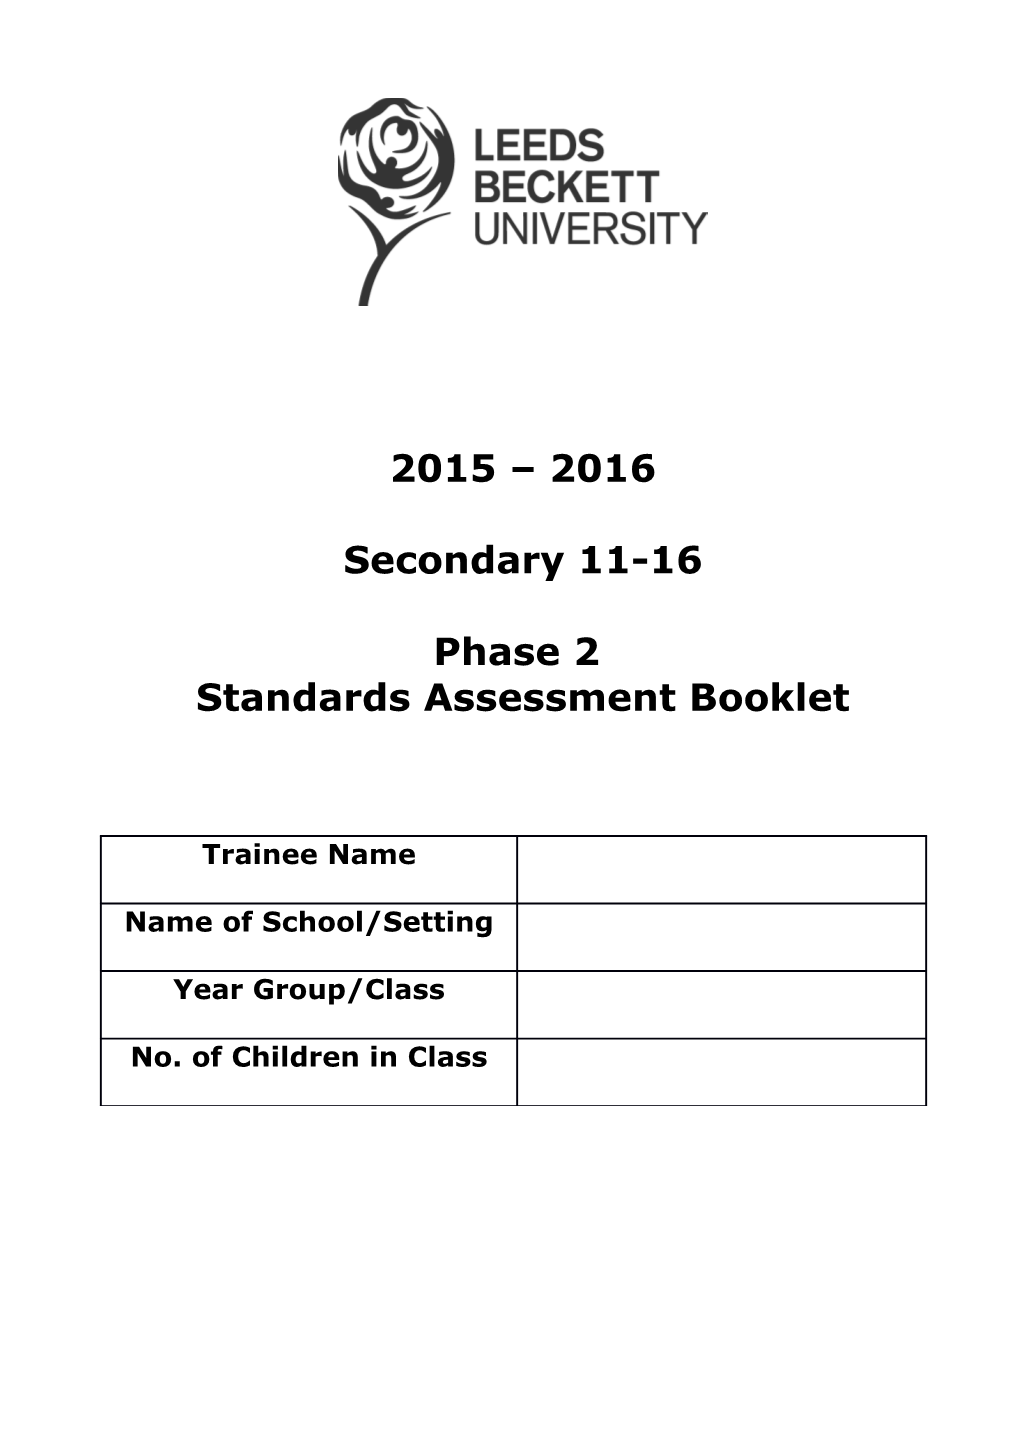 How to Use This Standards Assessment Booklet